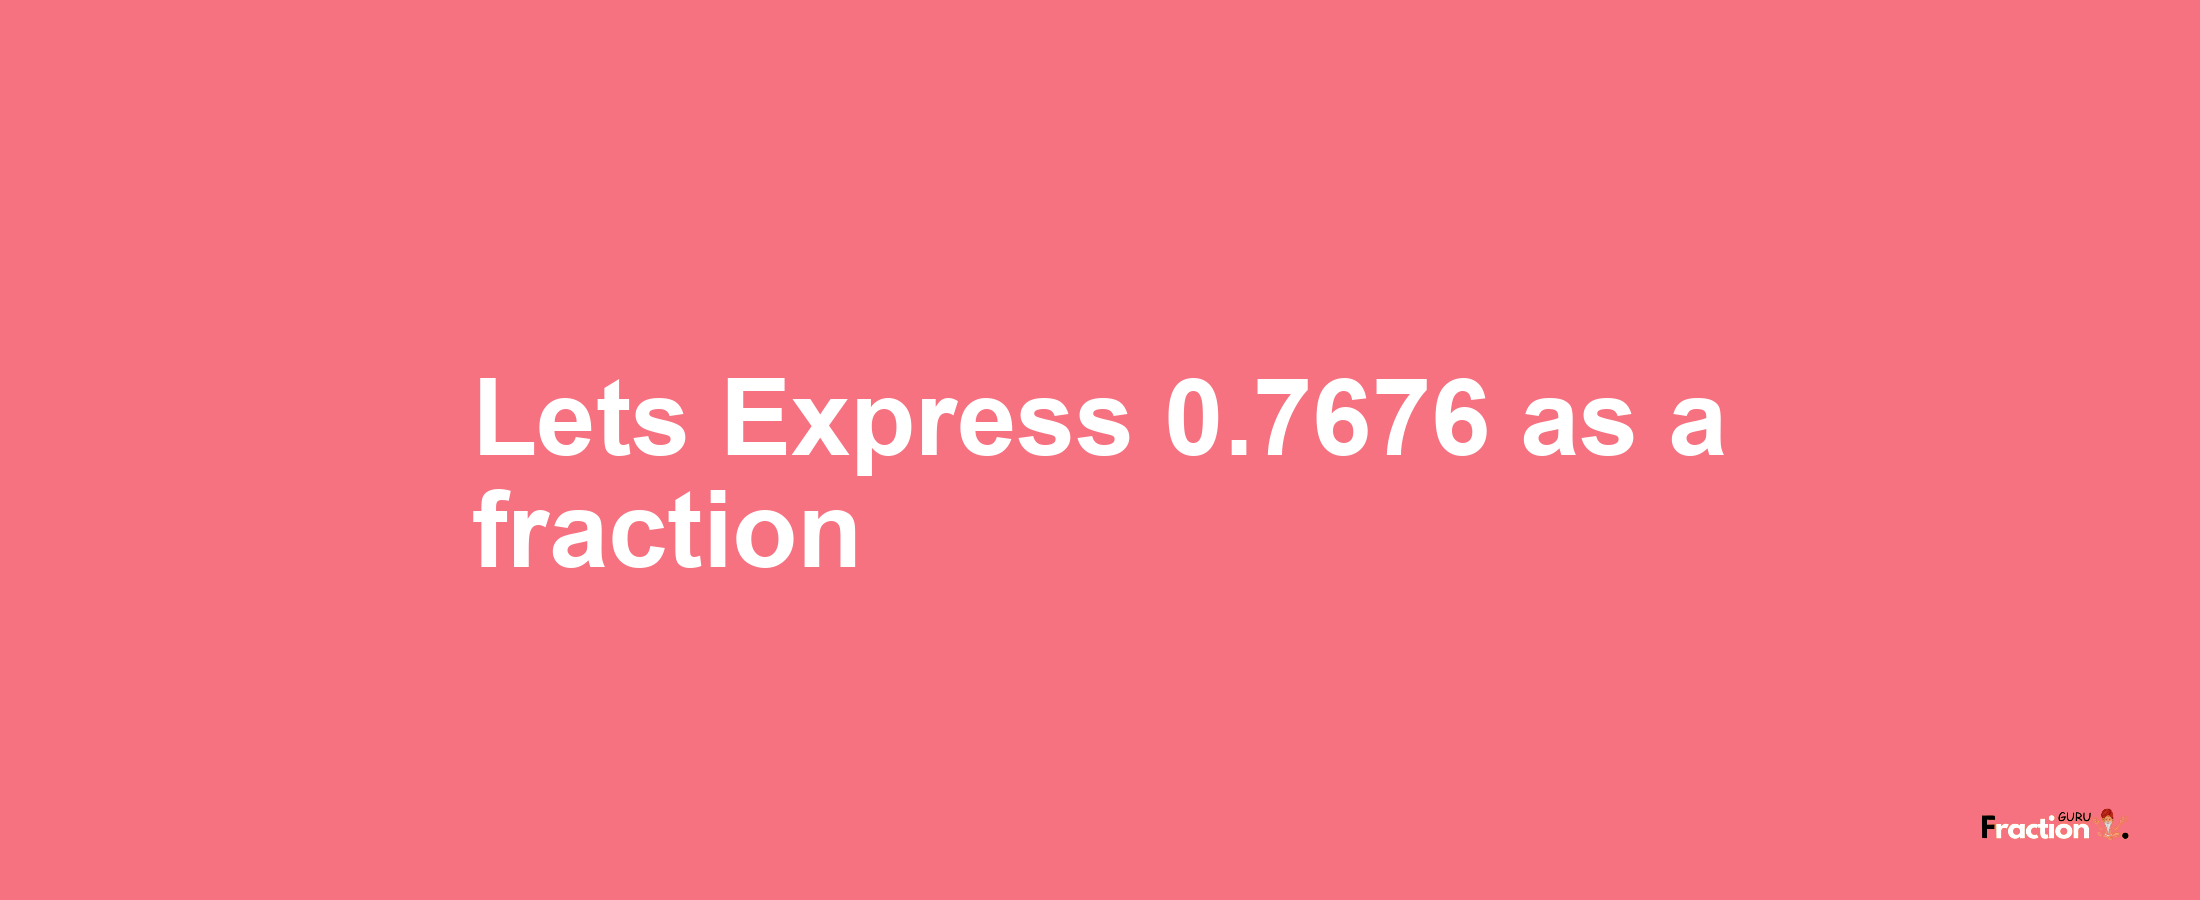 Lets Express 0.7676 as afraction